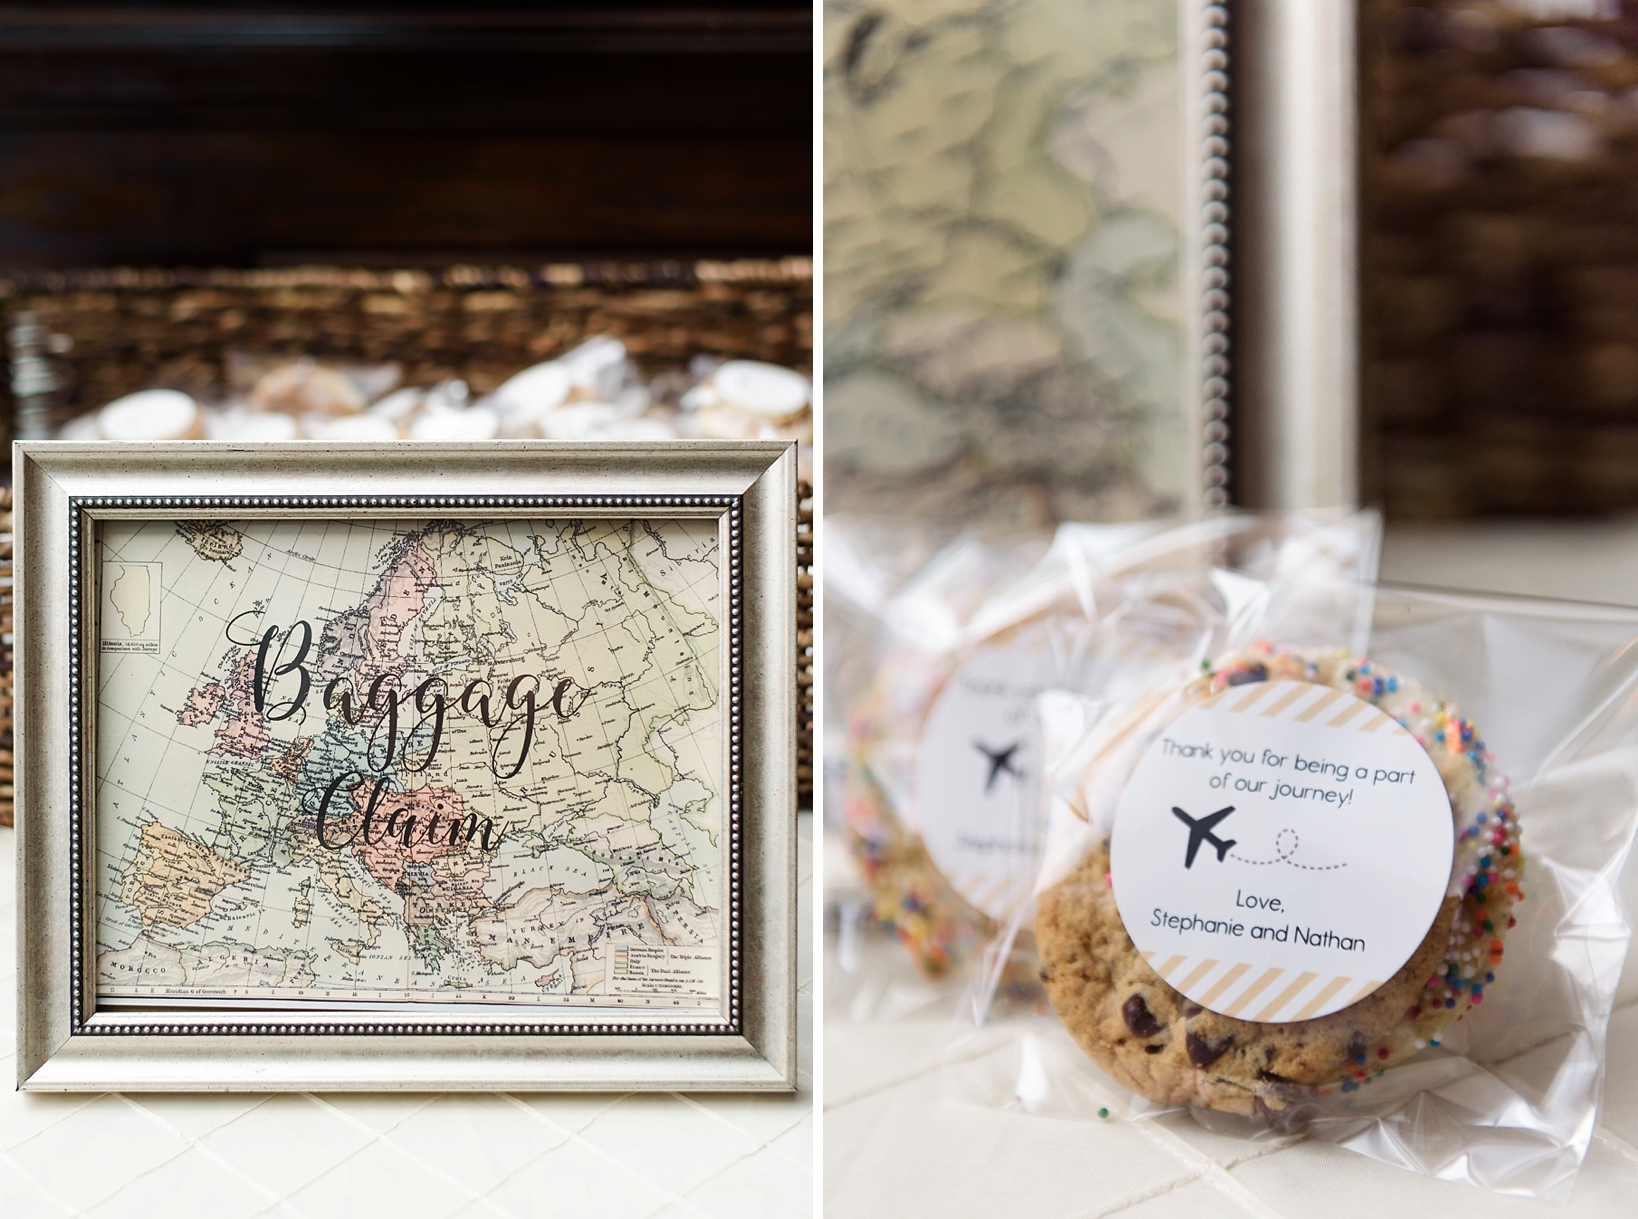 Cookies were given out as gifts keeping the travel theme going throughout the reception at the rusty pelican tampa bay